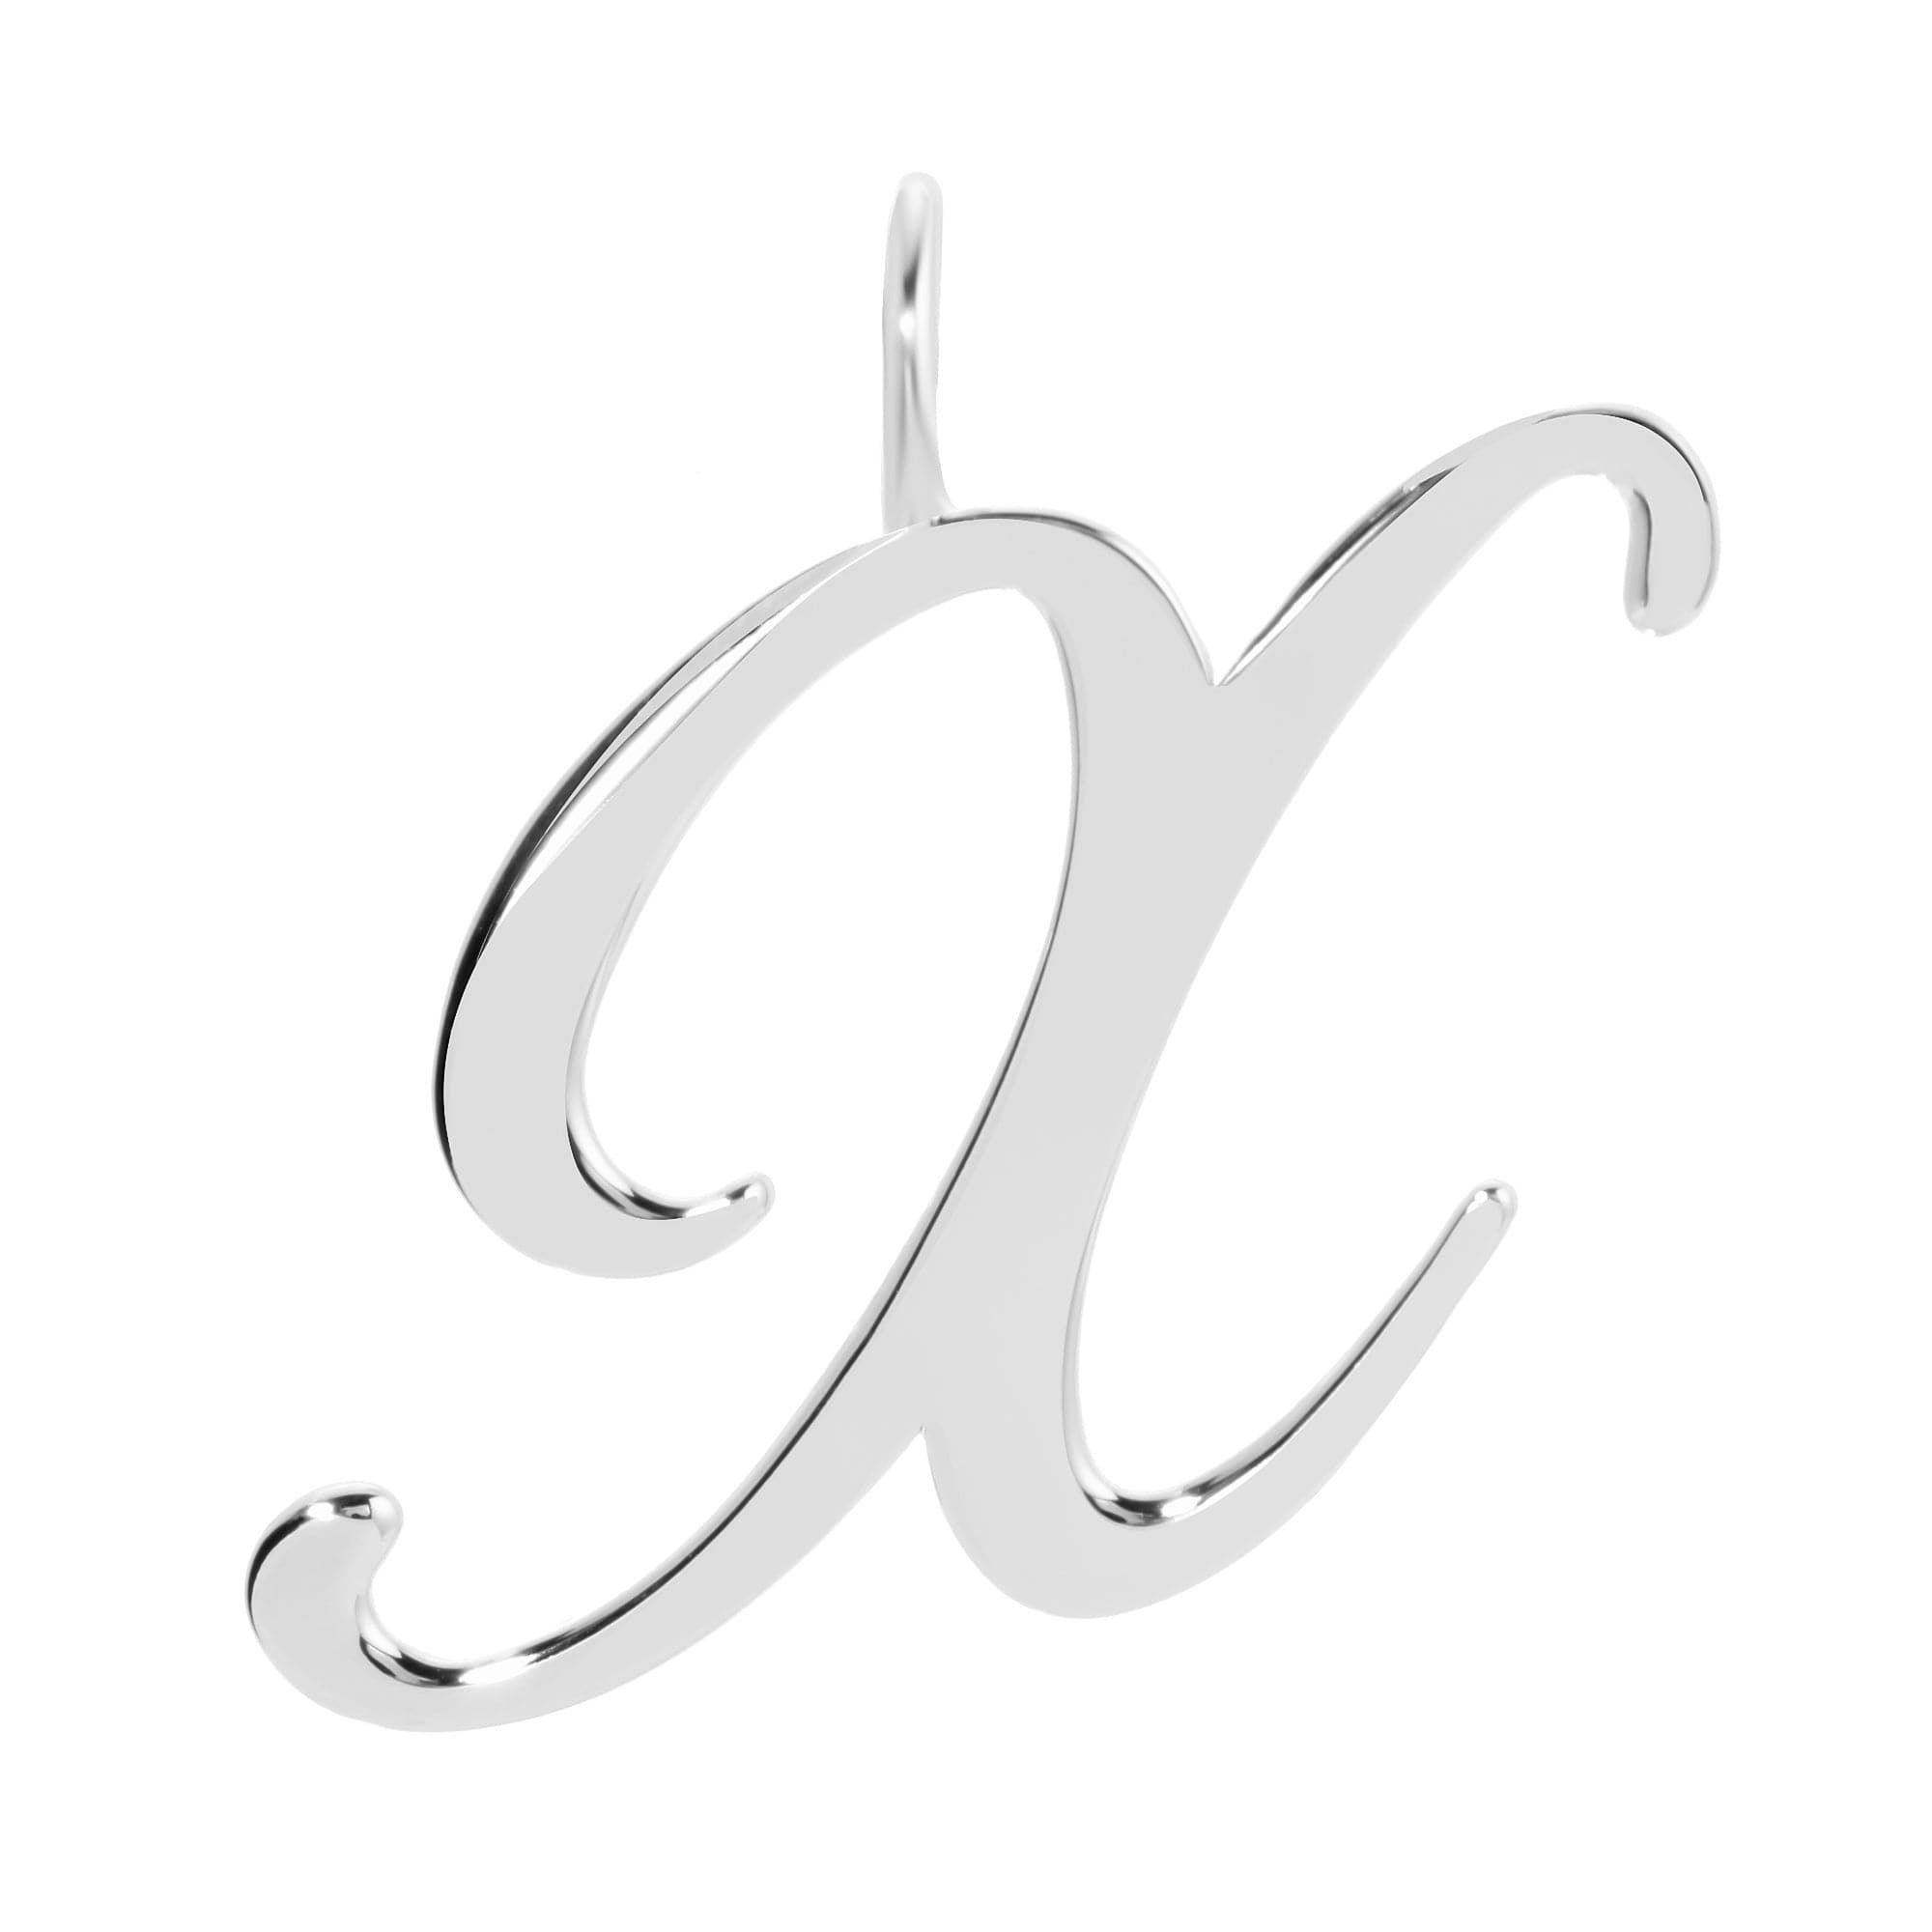 a silver letter with a curved design on a white background